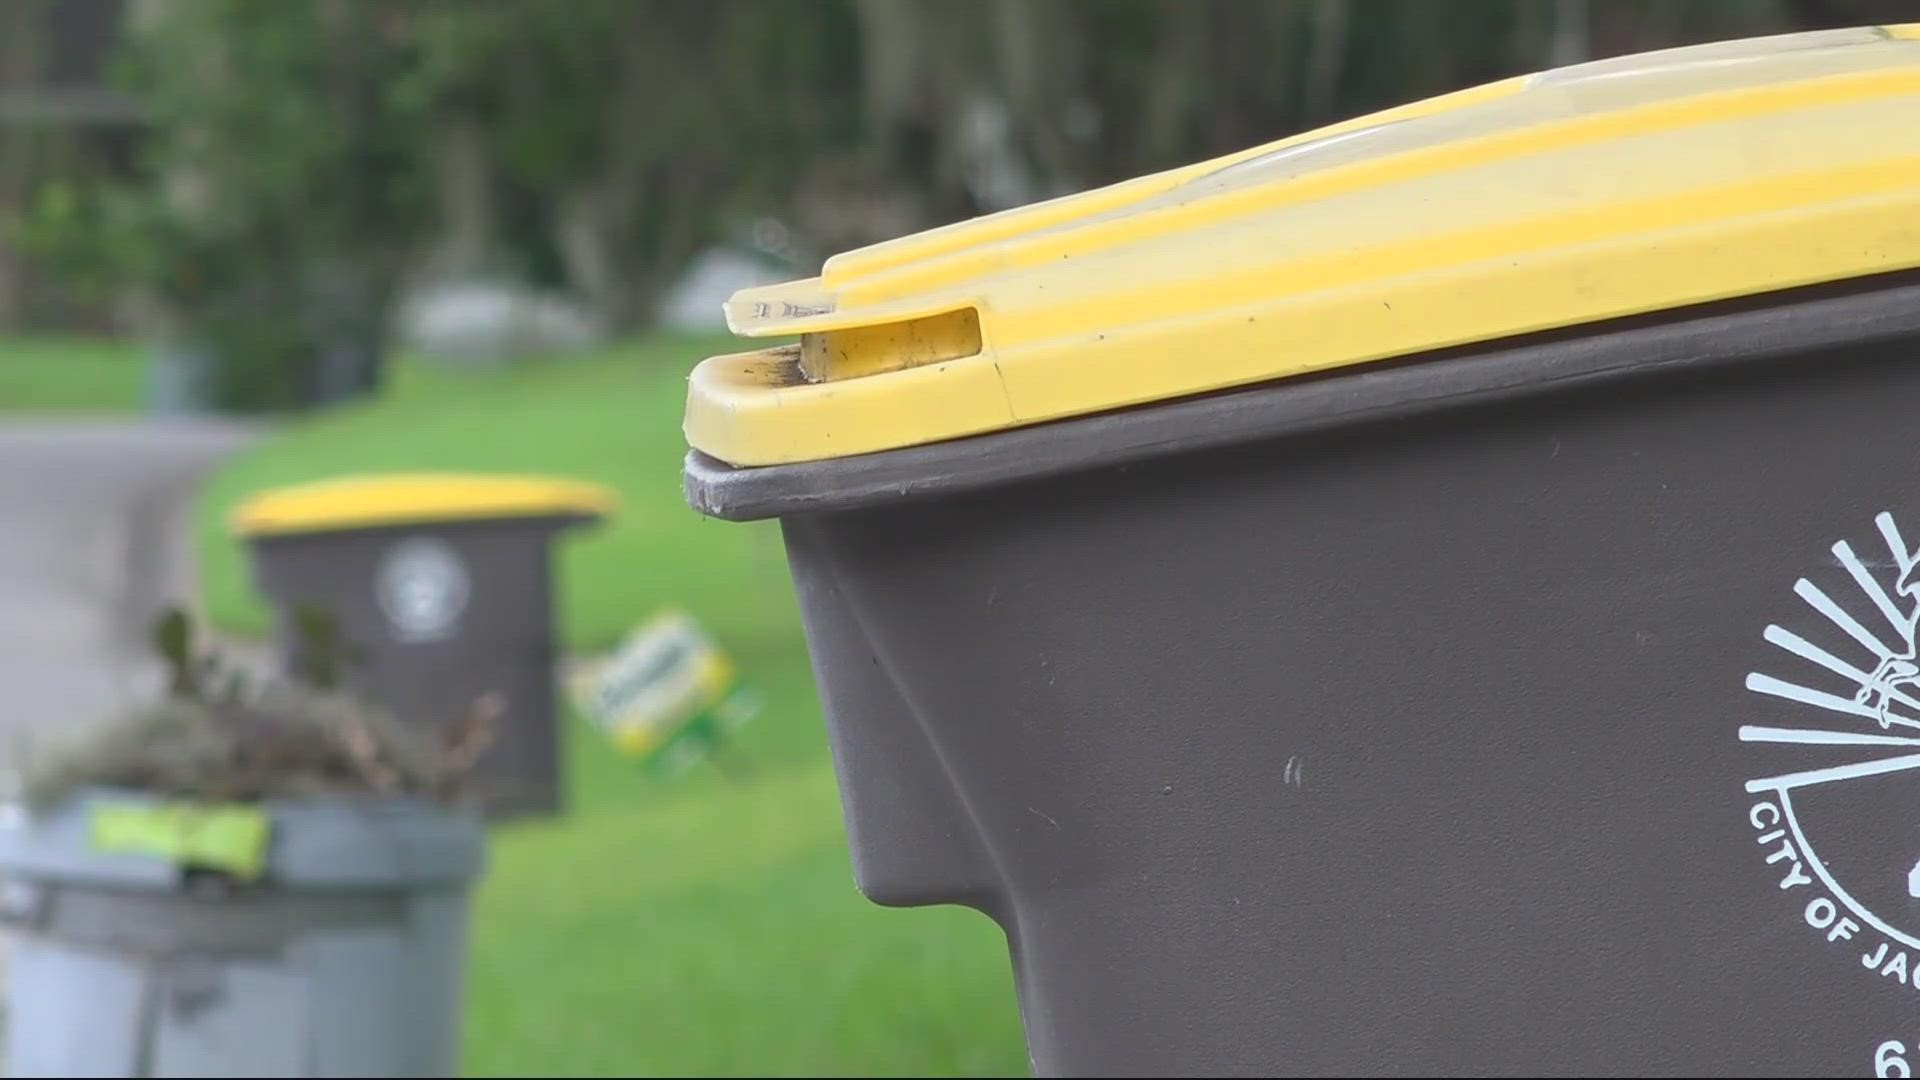 The program goal is to spread composting citywide in an effort to preserve the landfill.